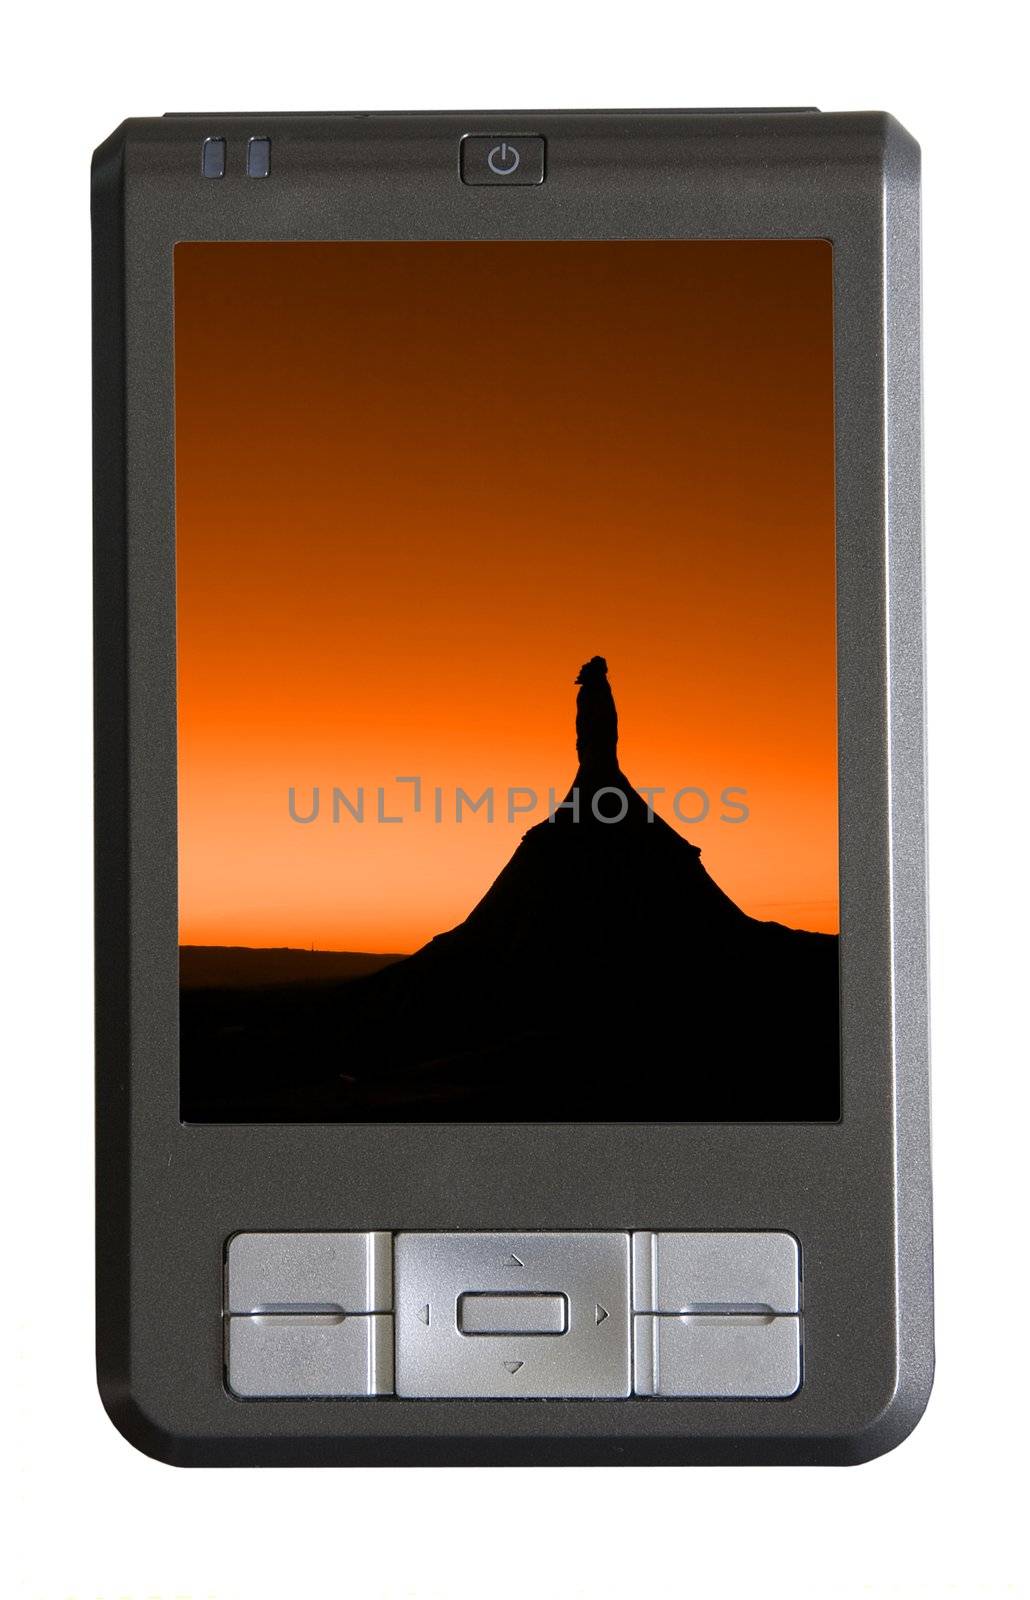 image of a pda technology device